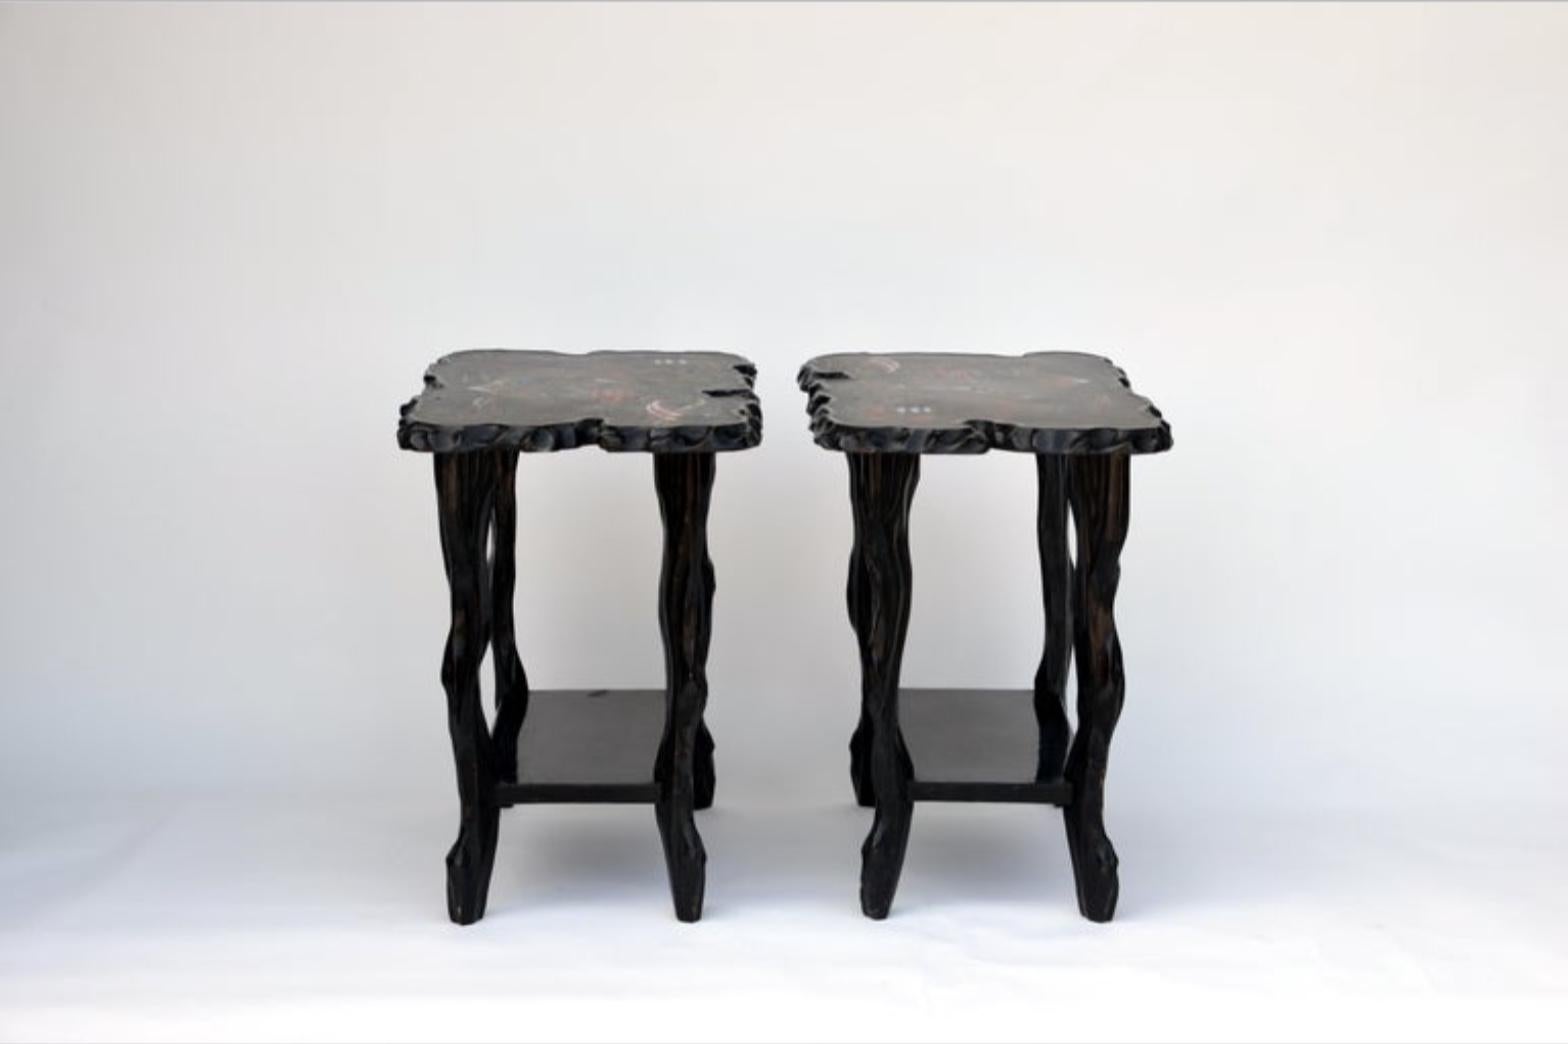 Pair of black lacquer ebonized and inlaid wood organic end tables. Also great as nightstands.